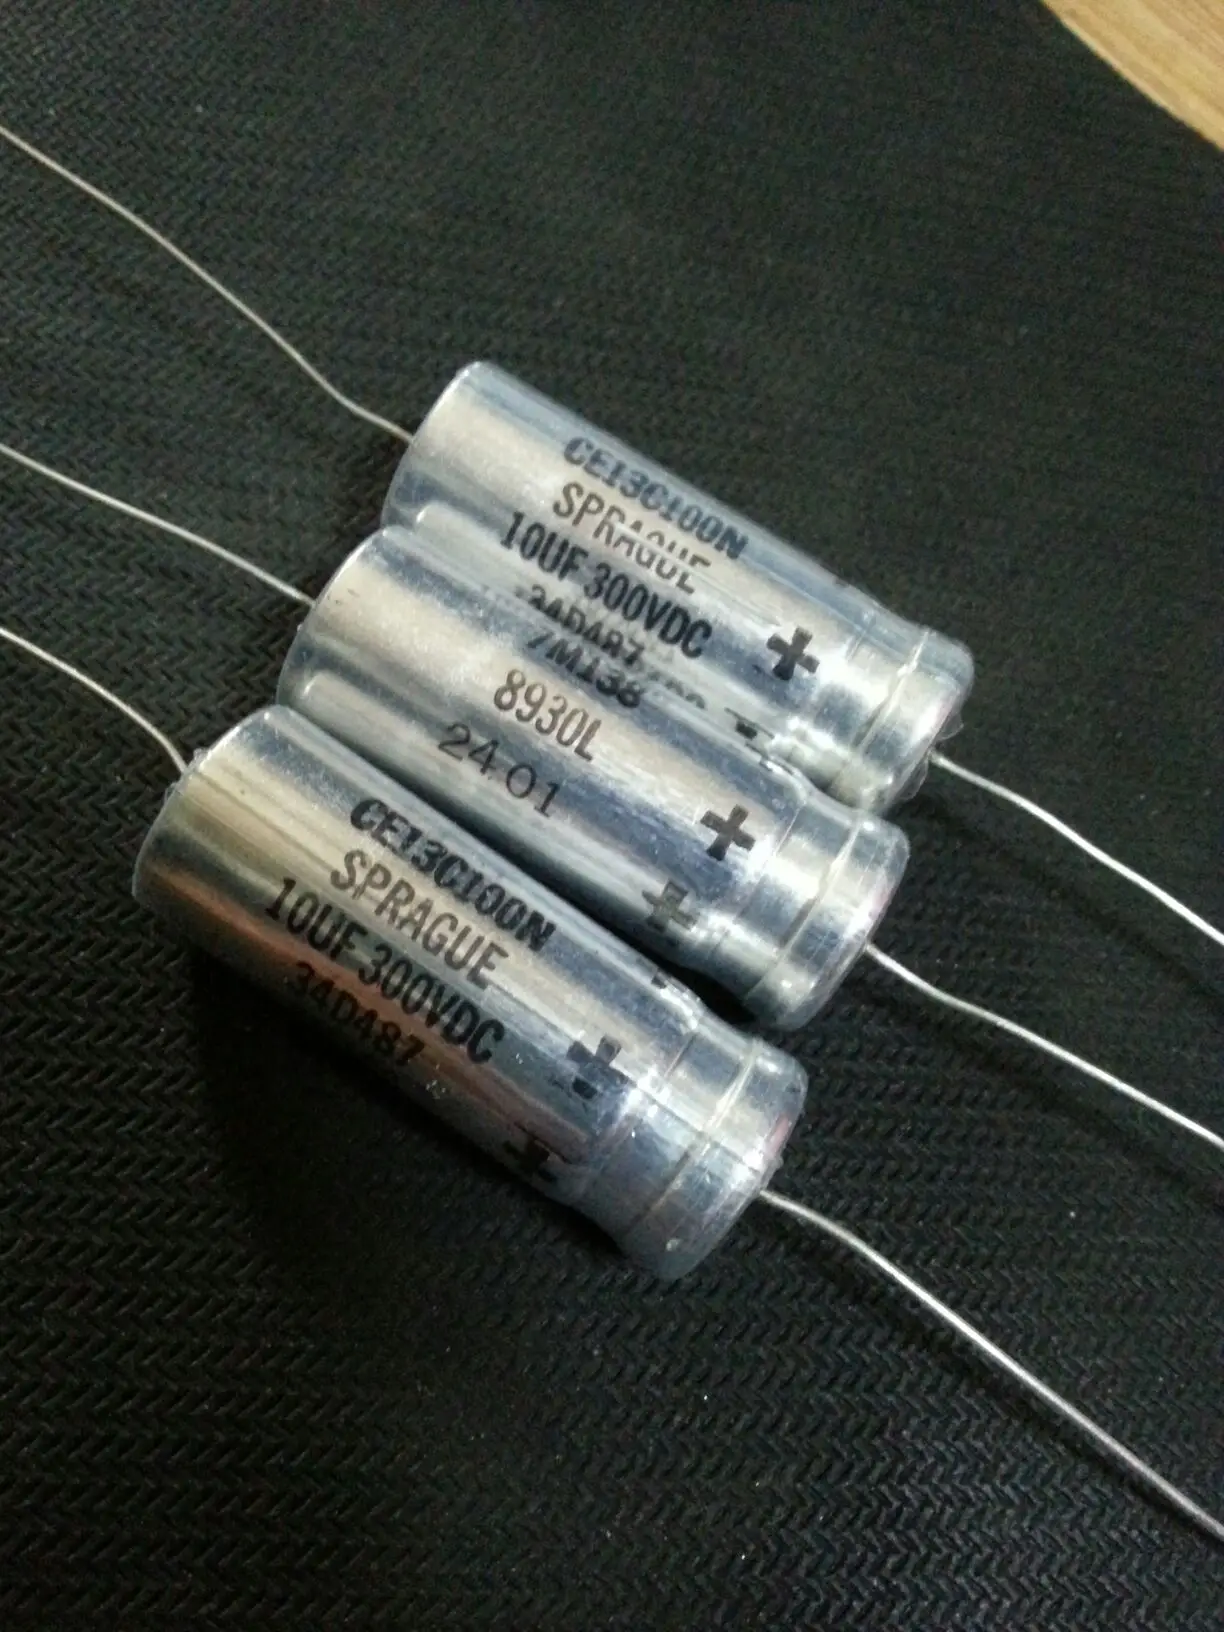 2pcs 4pcs 10pcs sprague 53d 35v4700uf 23x55mm axial filter electrolytic capacitor ucc 4700uf 35vdc made in usa 4700uf 35v 10pcs/30pcs American antique electrolytic capacitor SPRAGUE 10UF 300V 34D full copper foot free shipping